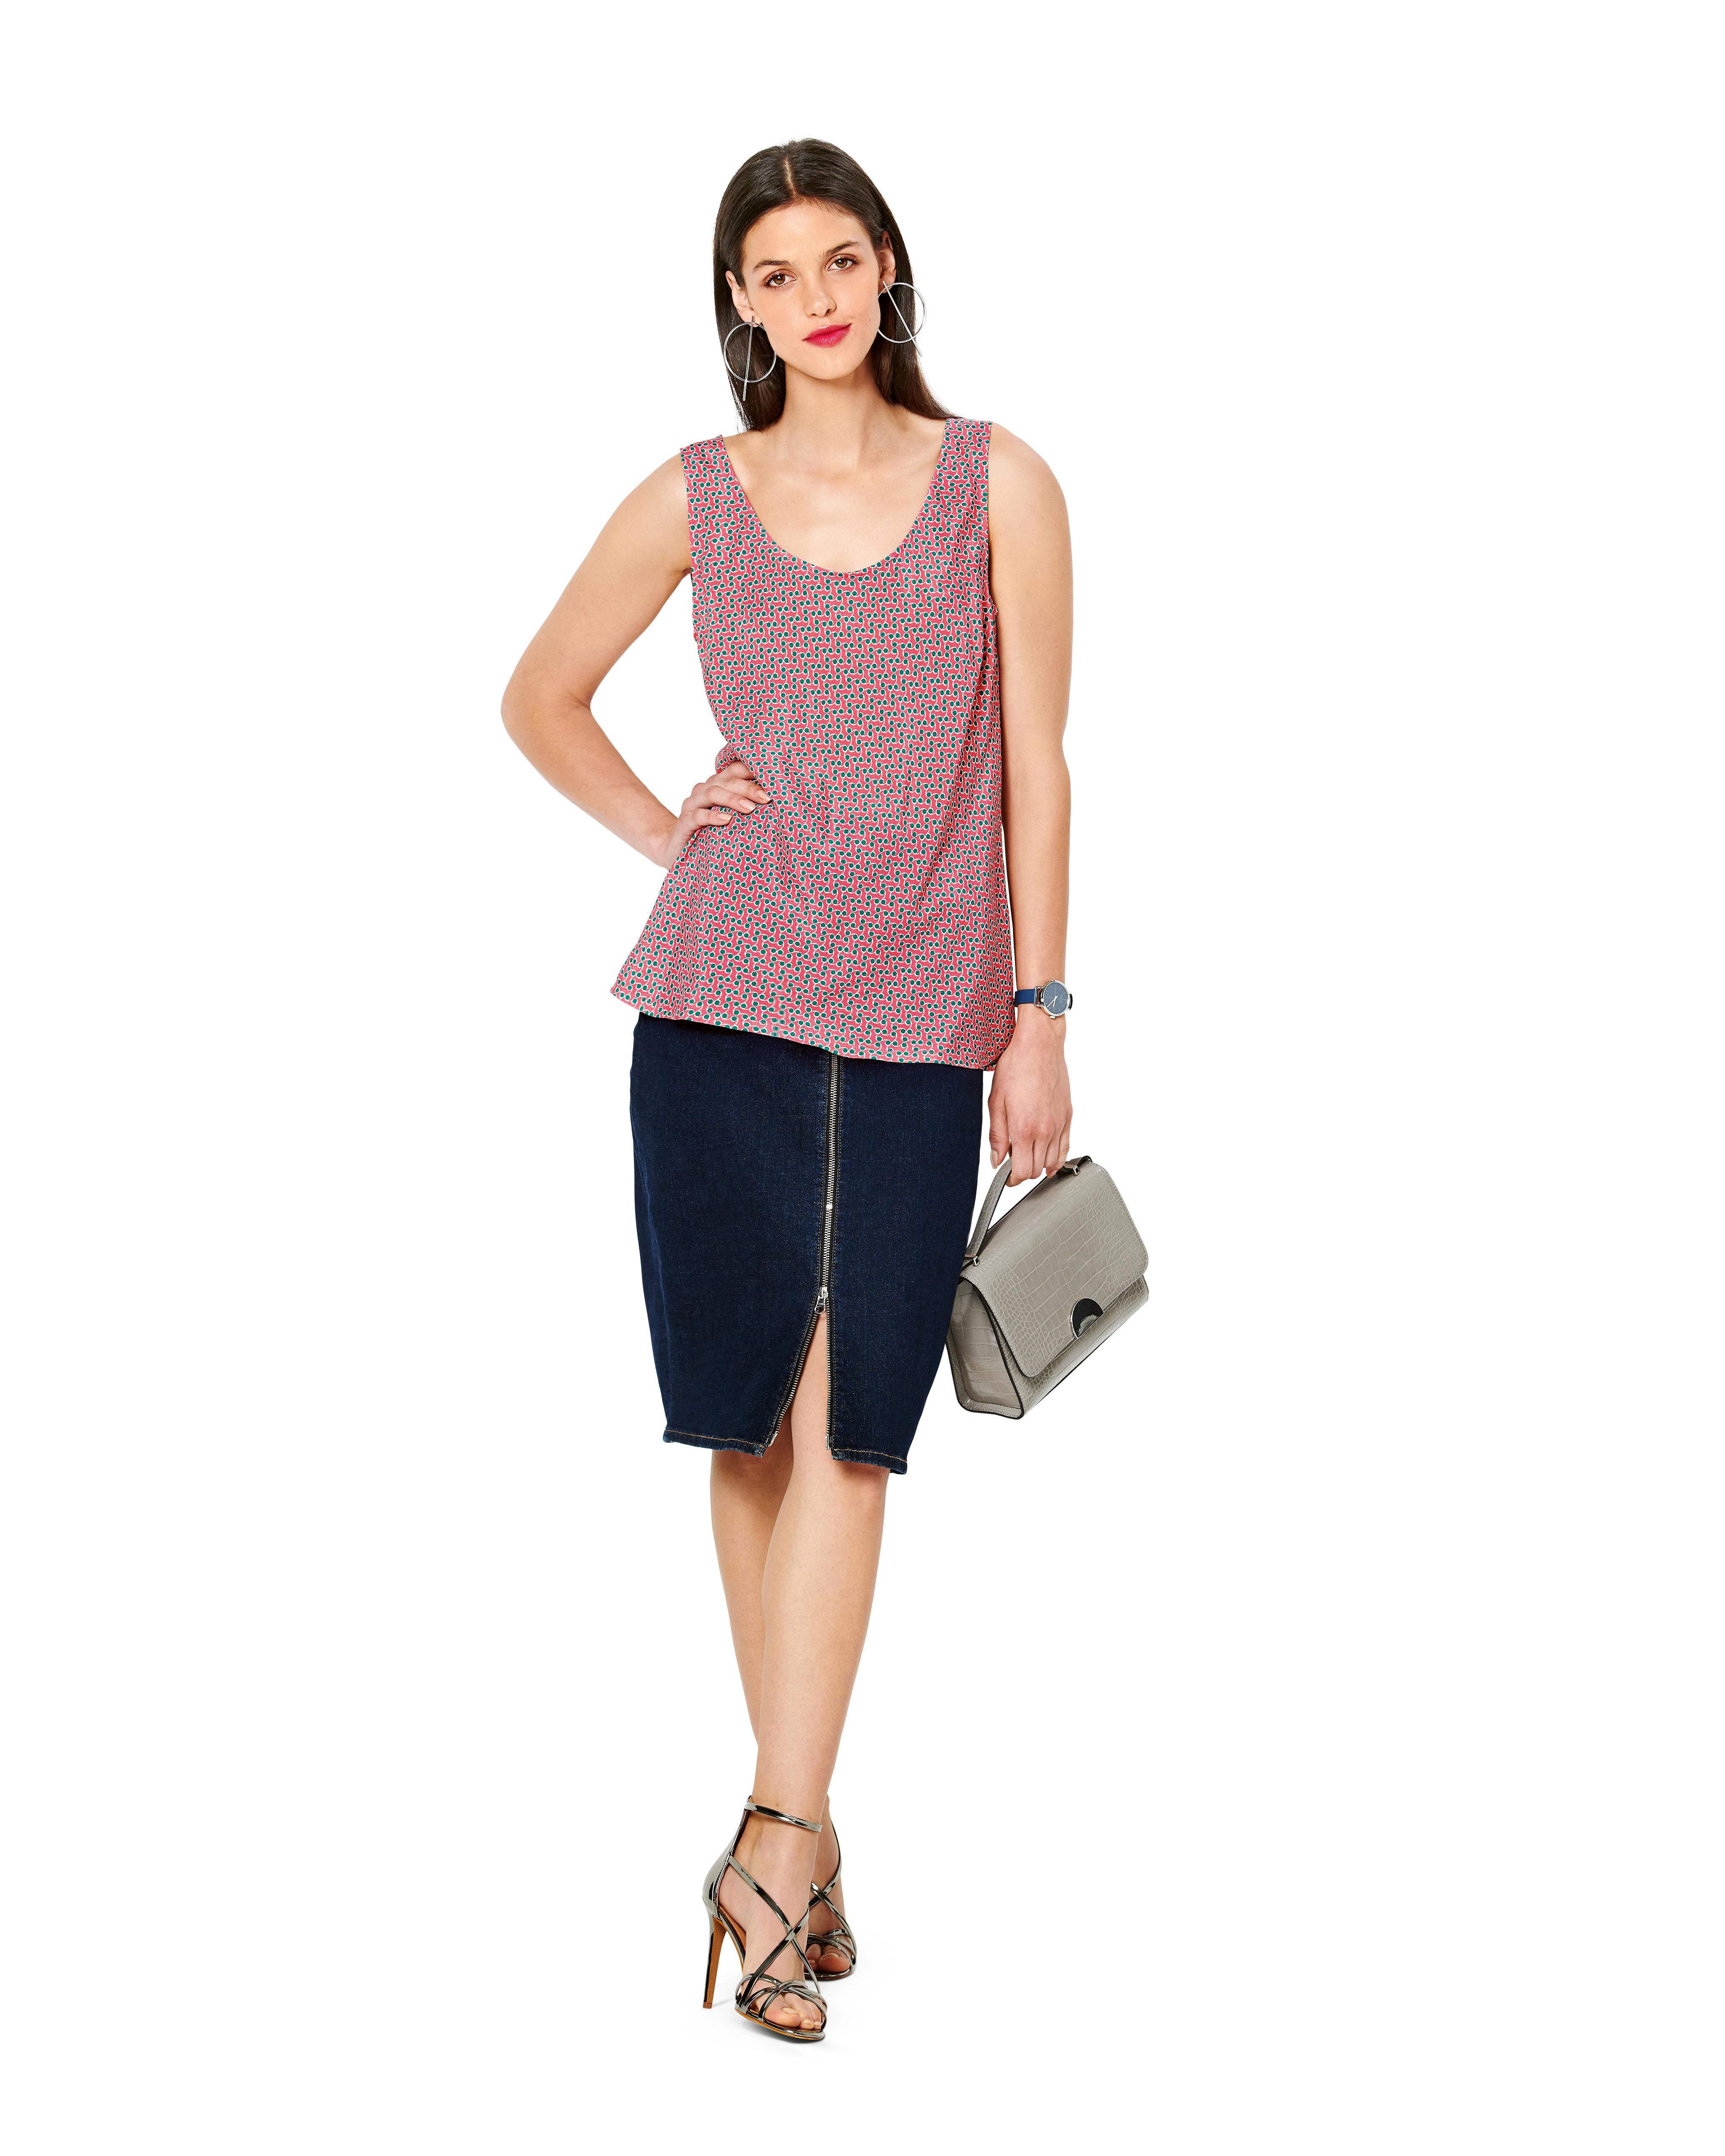 Burda B6231 Top with Rounded Neckline Sewing Pattern